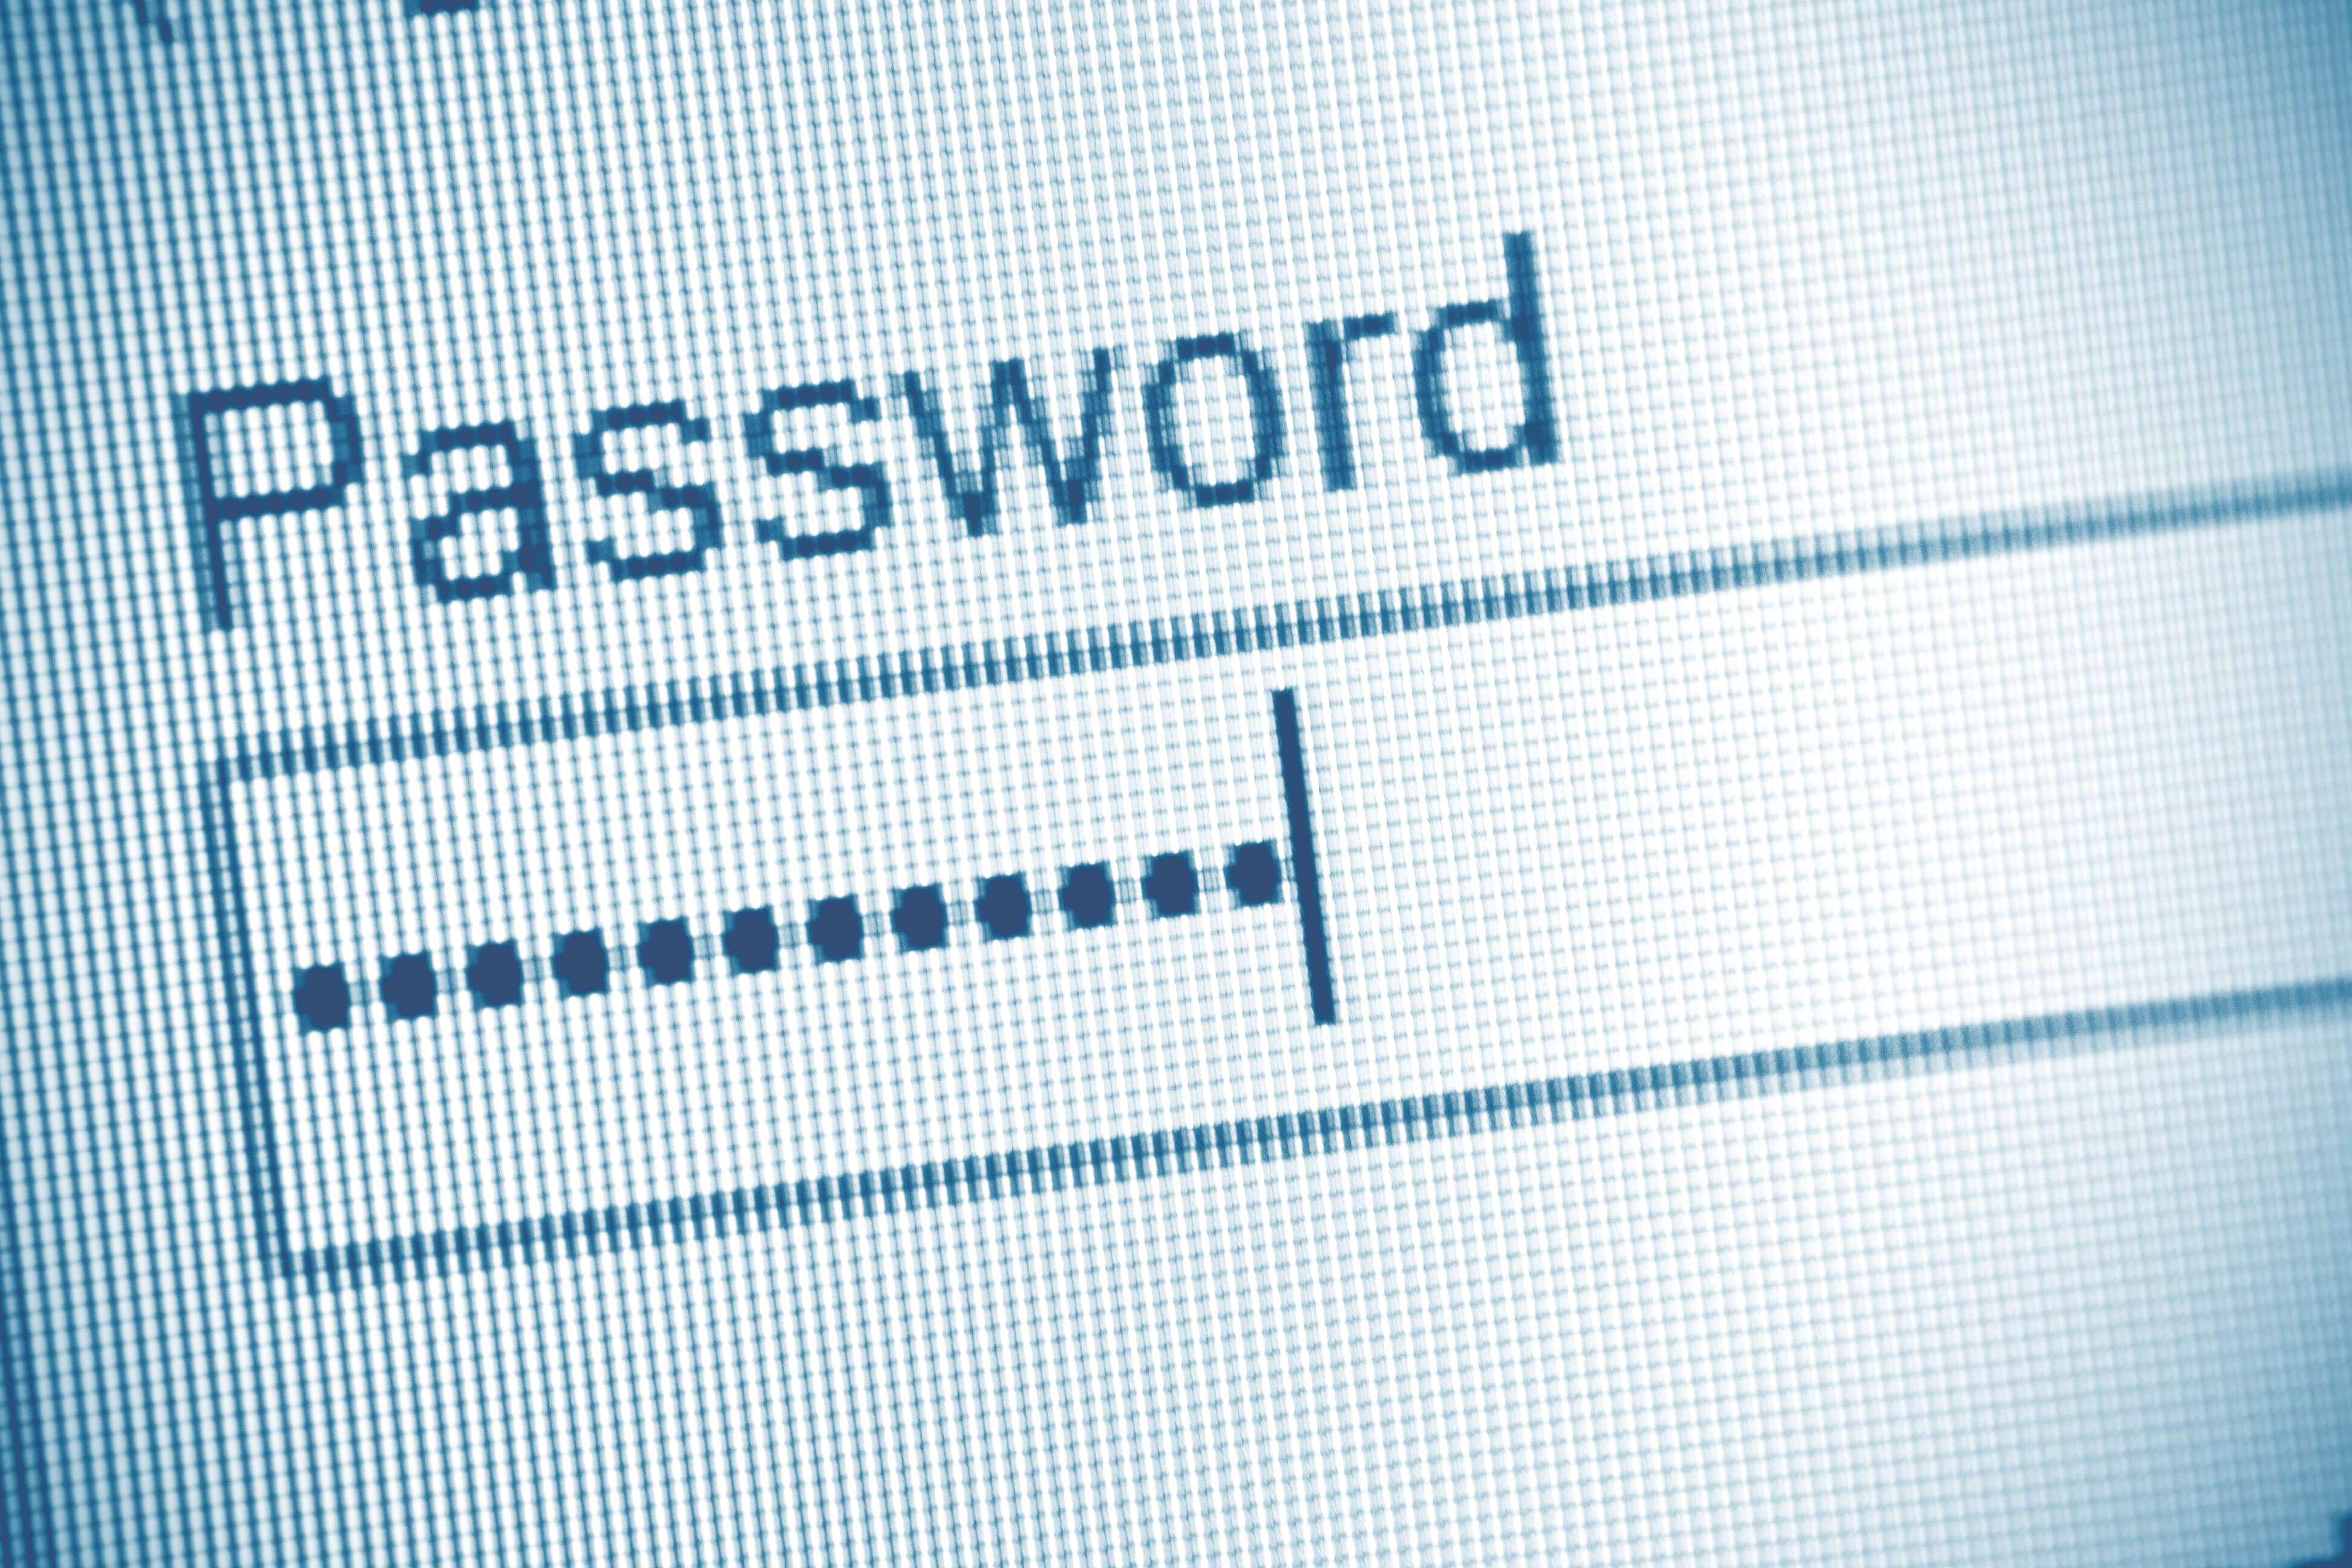 Passwords are no longer sufficient security.